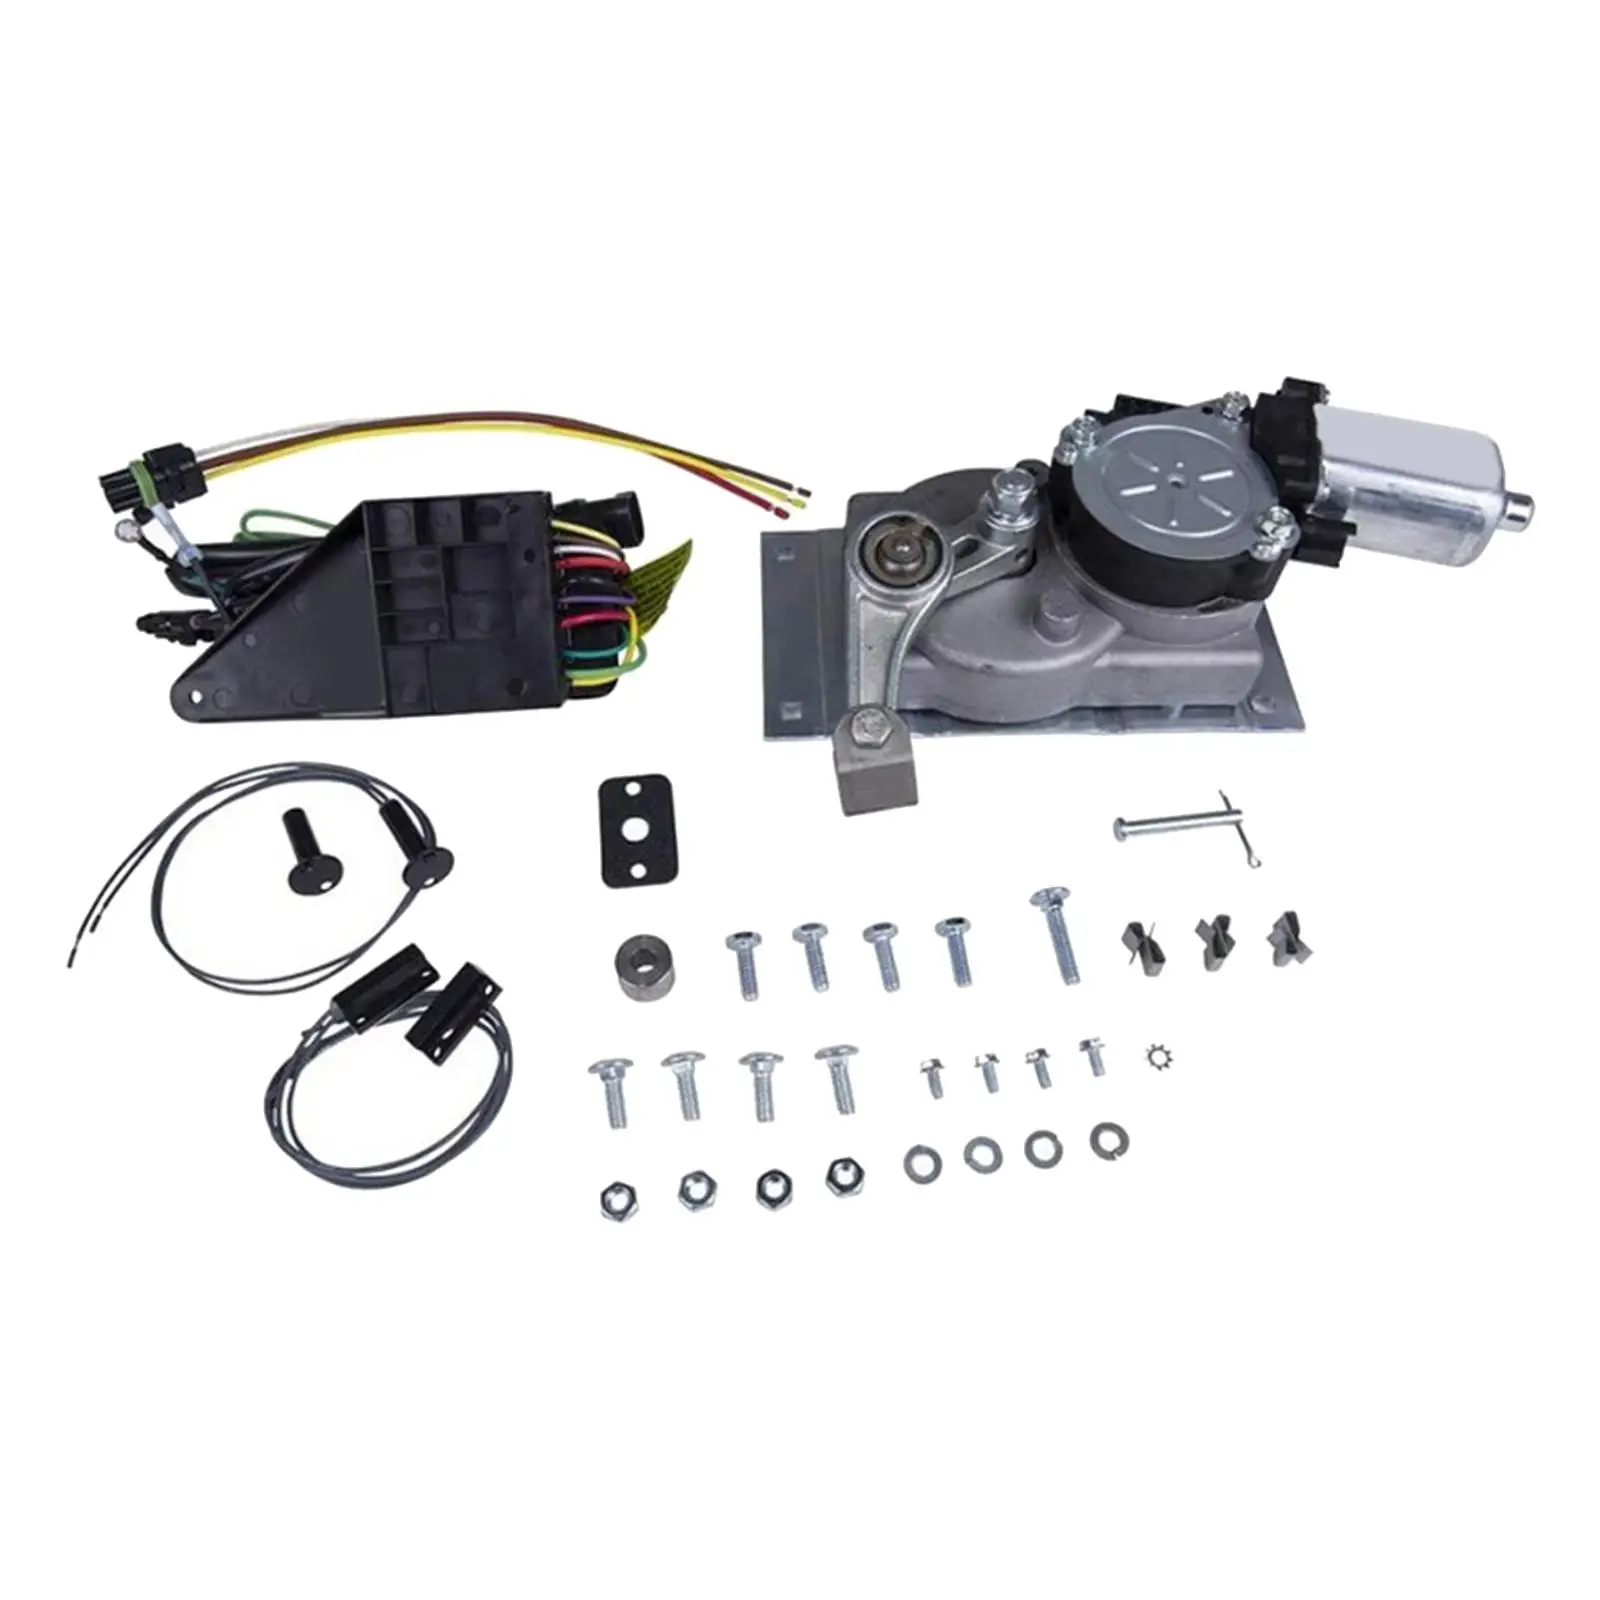 RV Trailer Step Motor Conversion Kit Metal 379146 for B Linkage Transport Vehicle Easy to Mount Modification Assembly